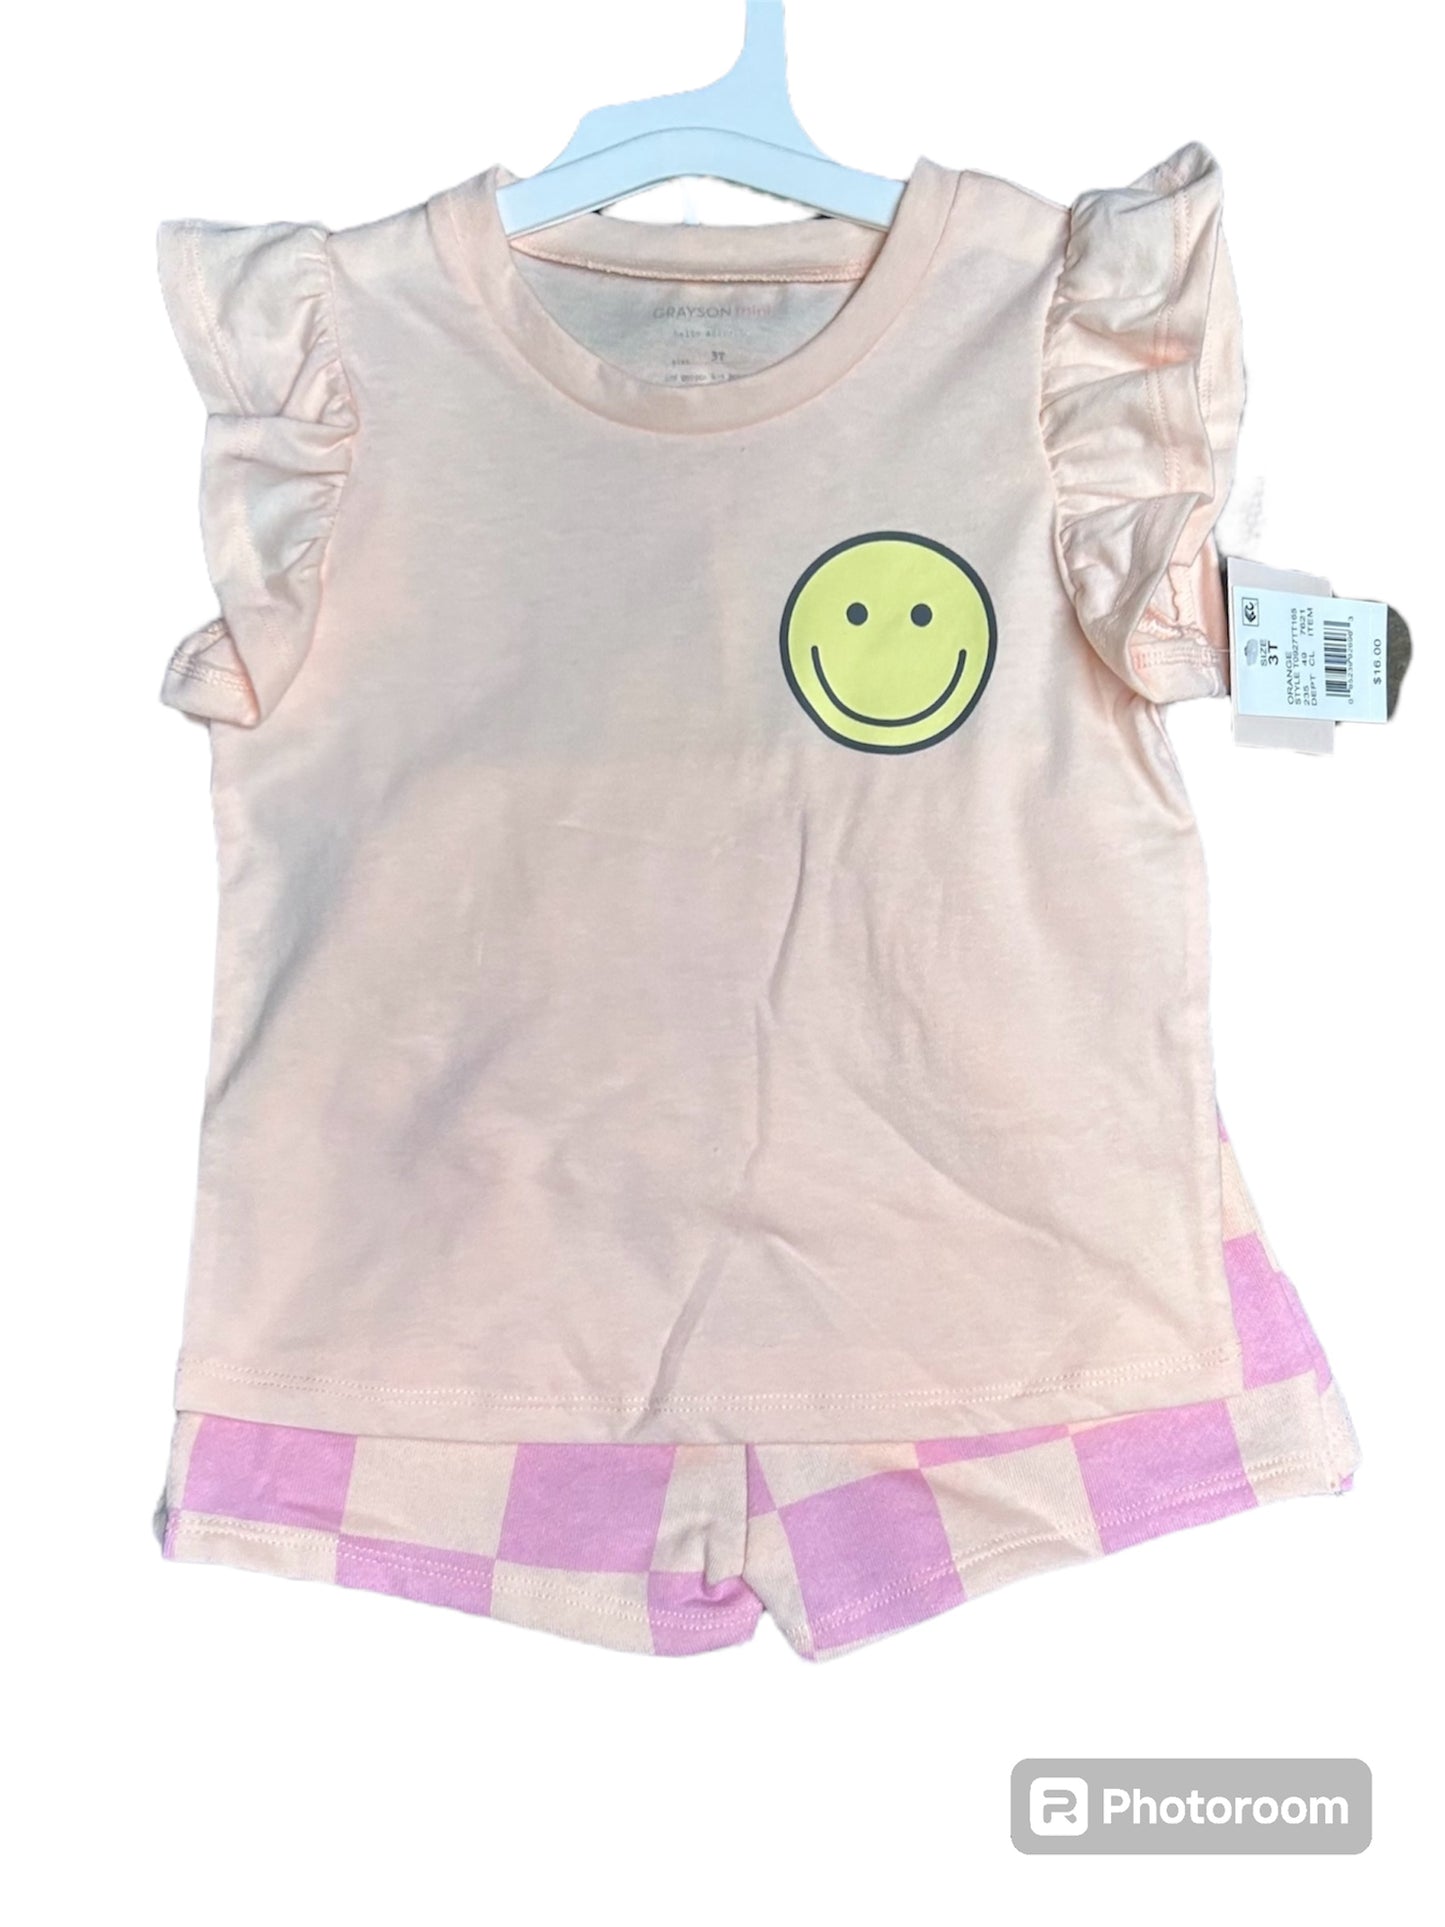 Toddler “Smiley Face” 2pc Outfit- 3T